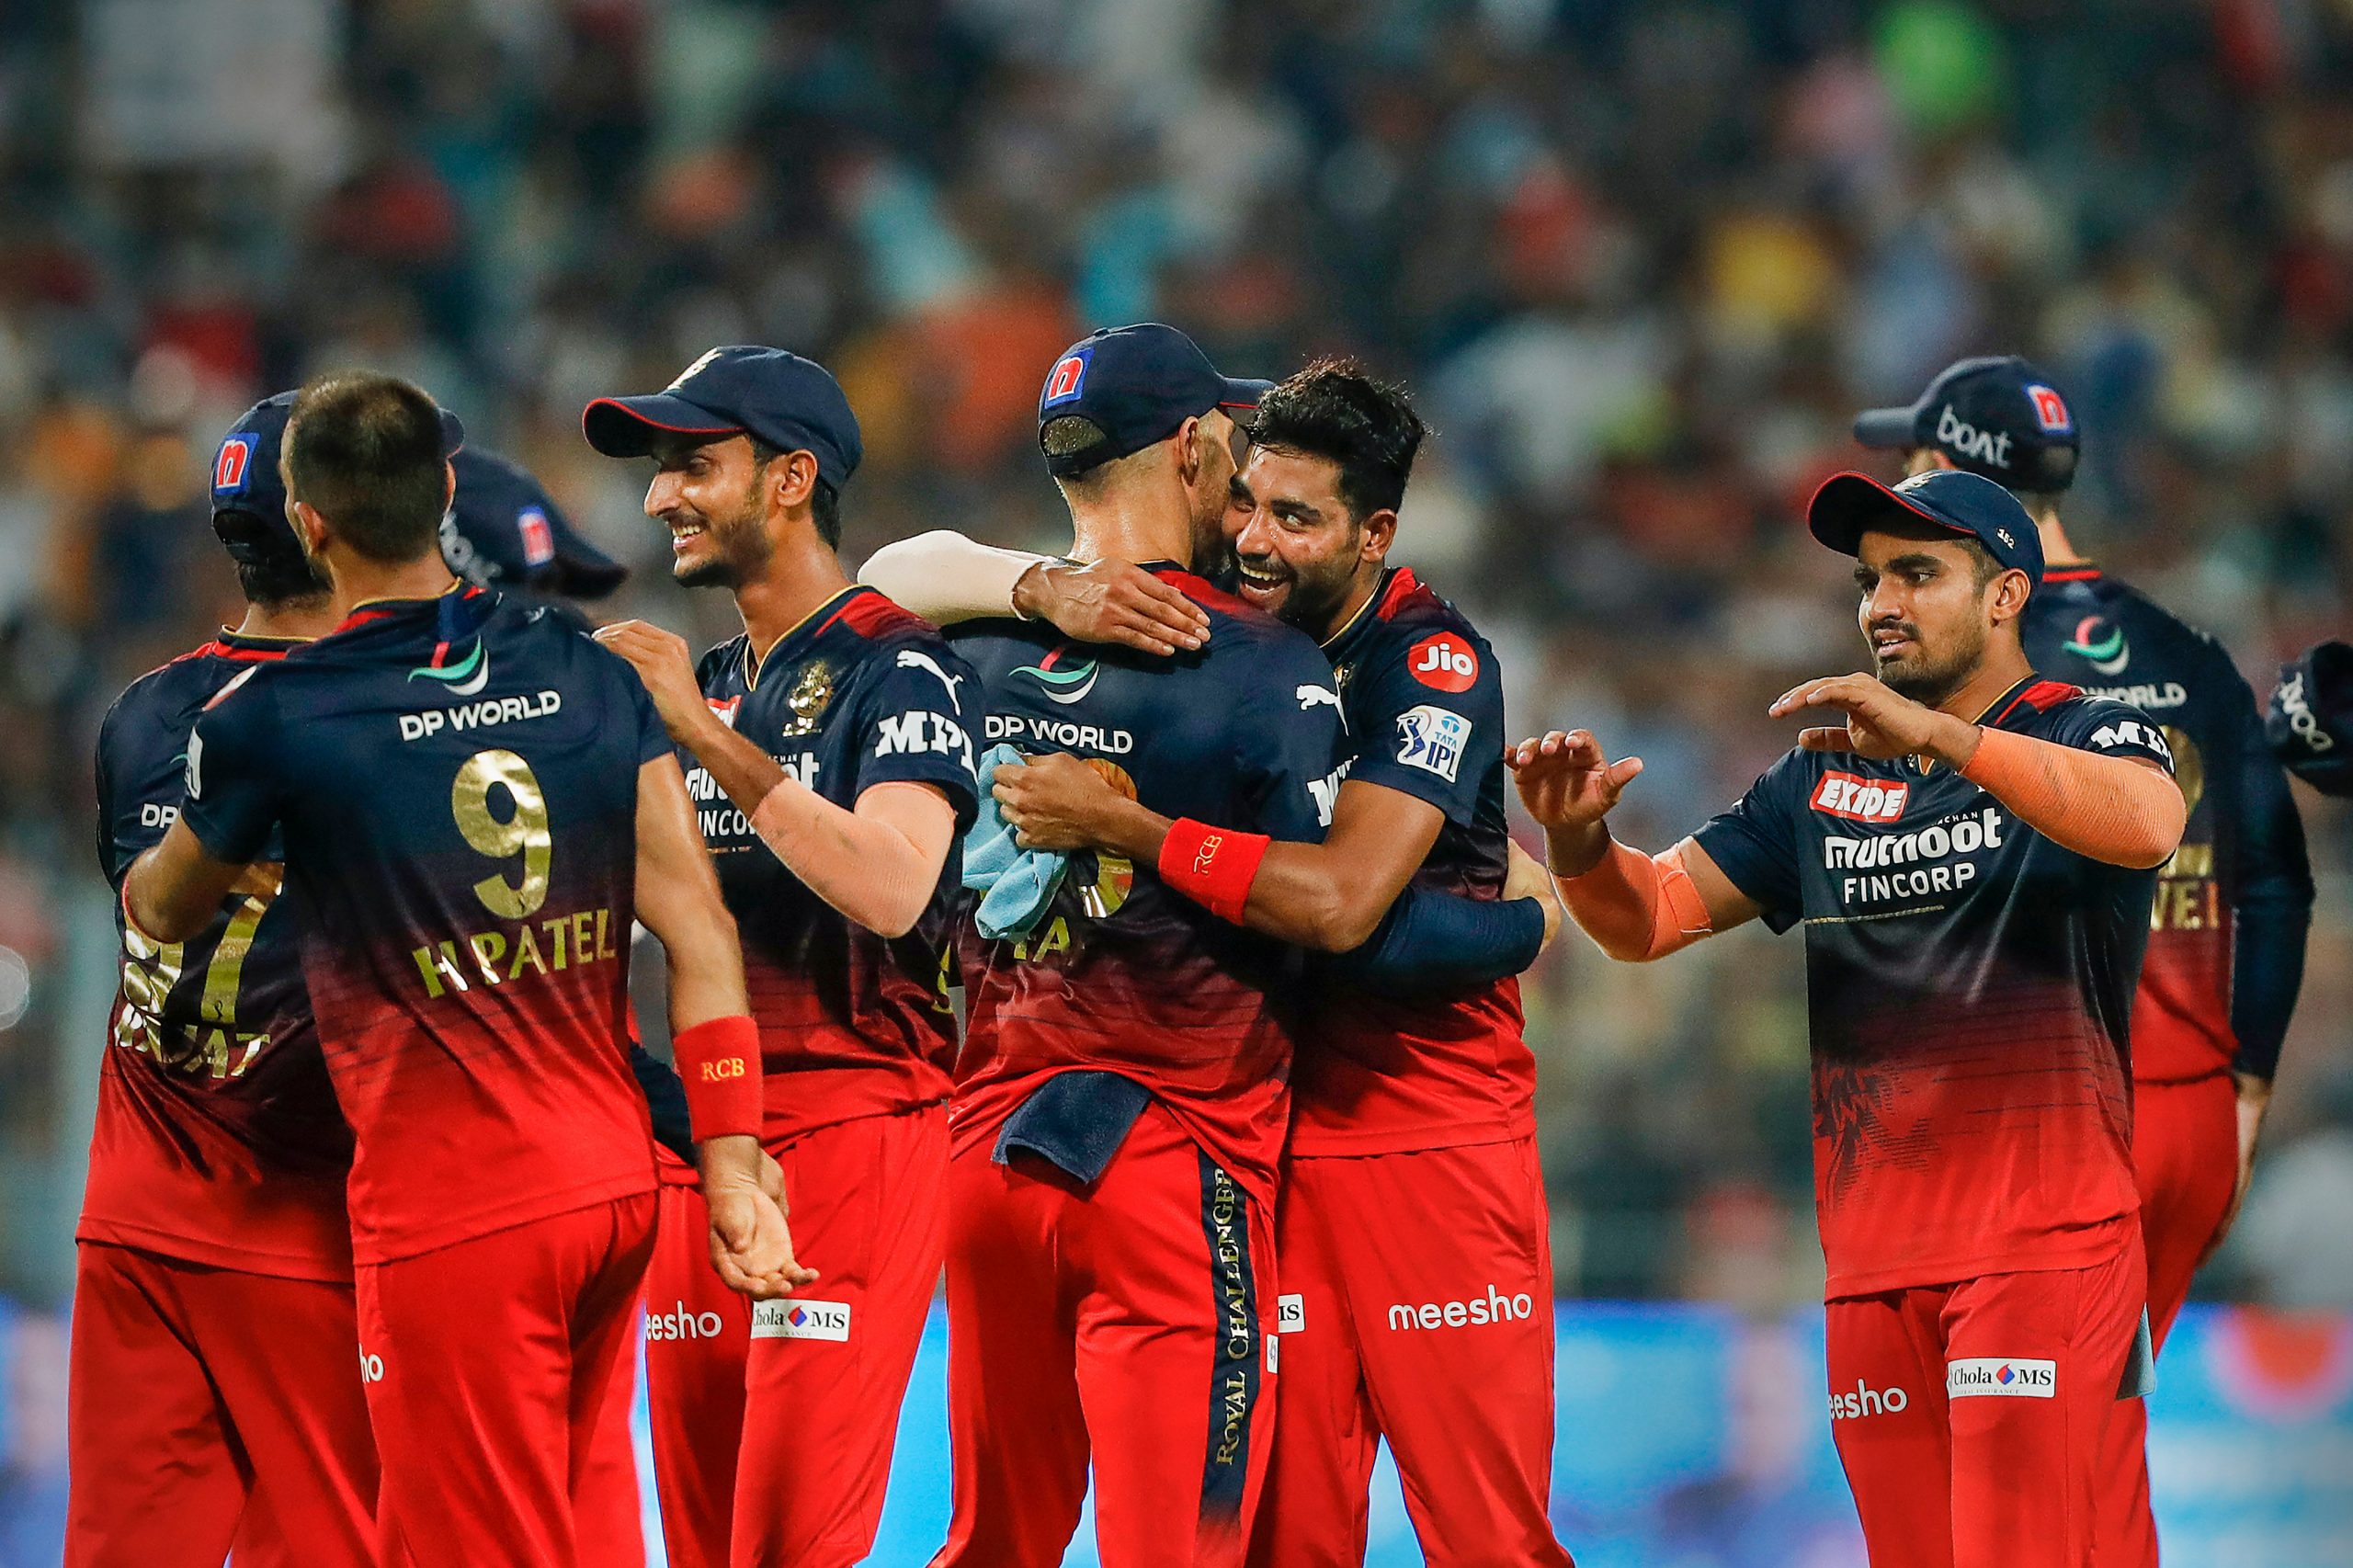 IPL 2022: Pumped up, RCB chase 4th IPL final going against Rajasthan Royals